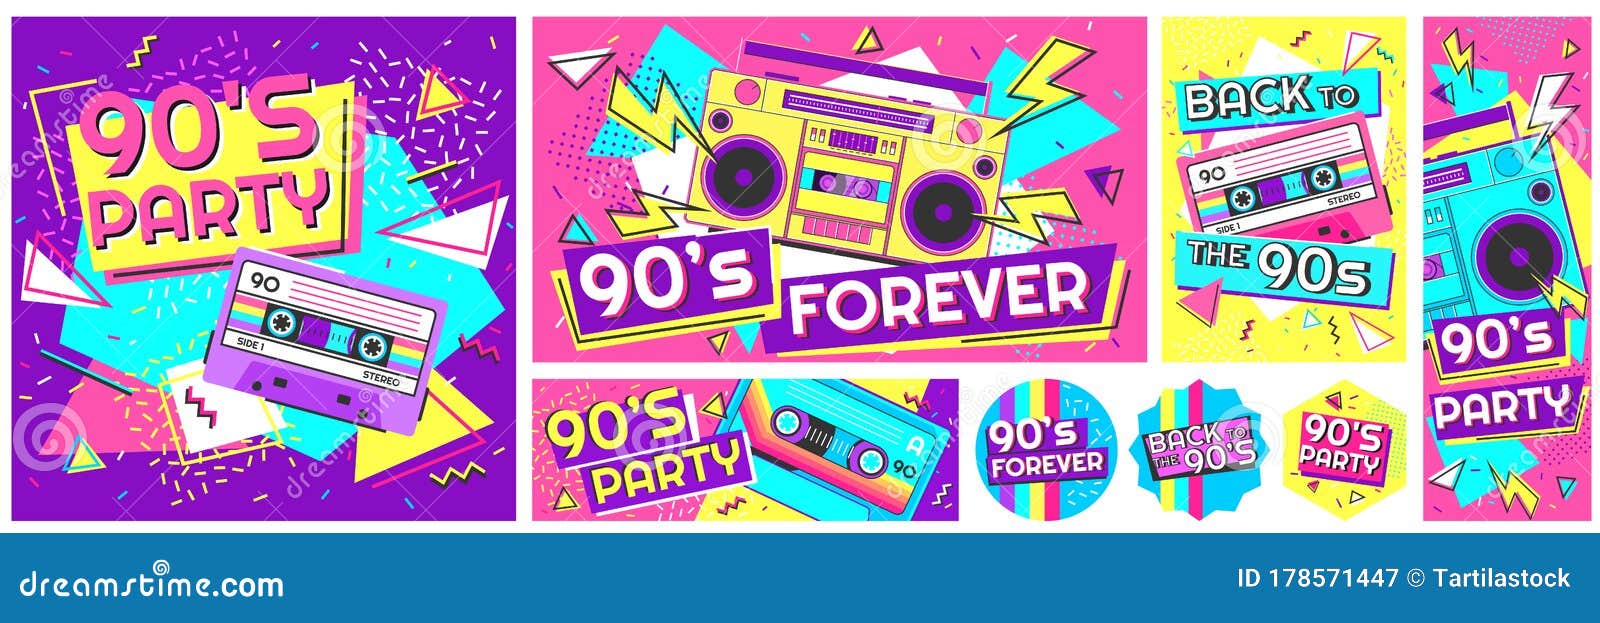 retro 90s music party poster. back to the 90s, nineties forever banner and retro funky pop radio badge 